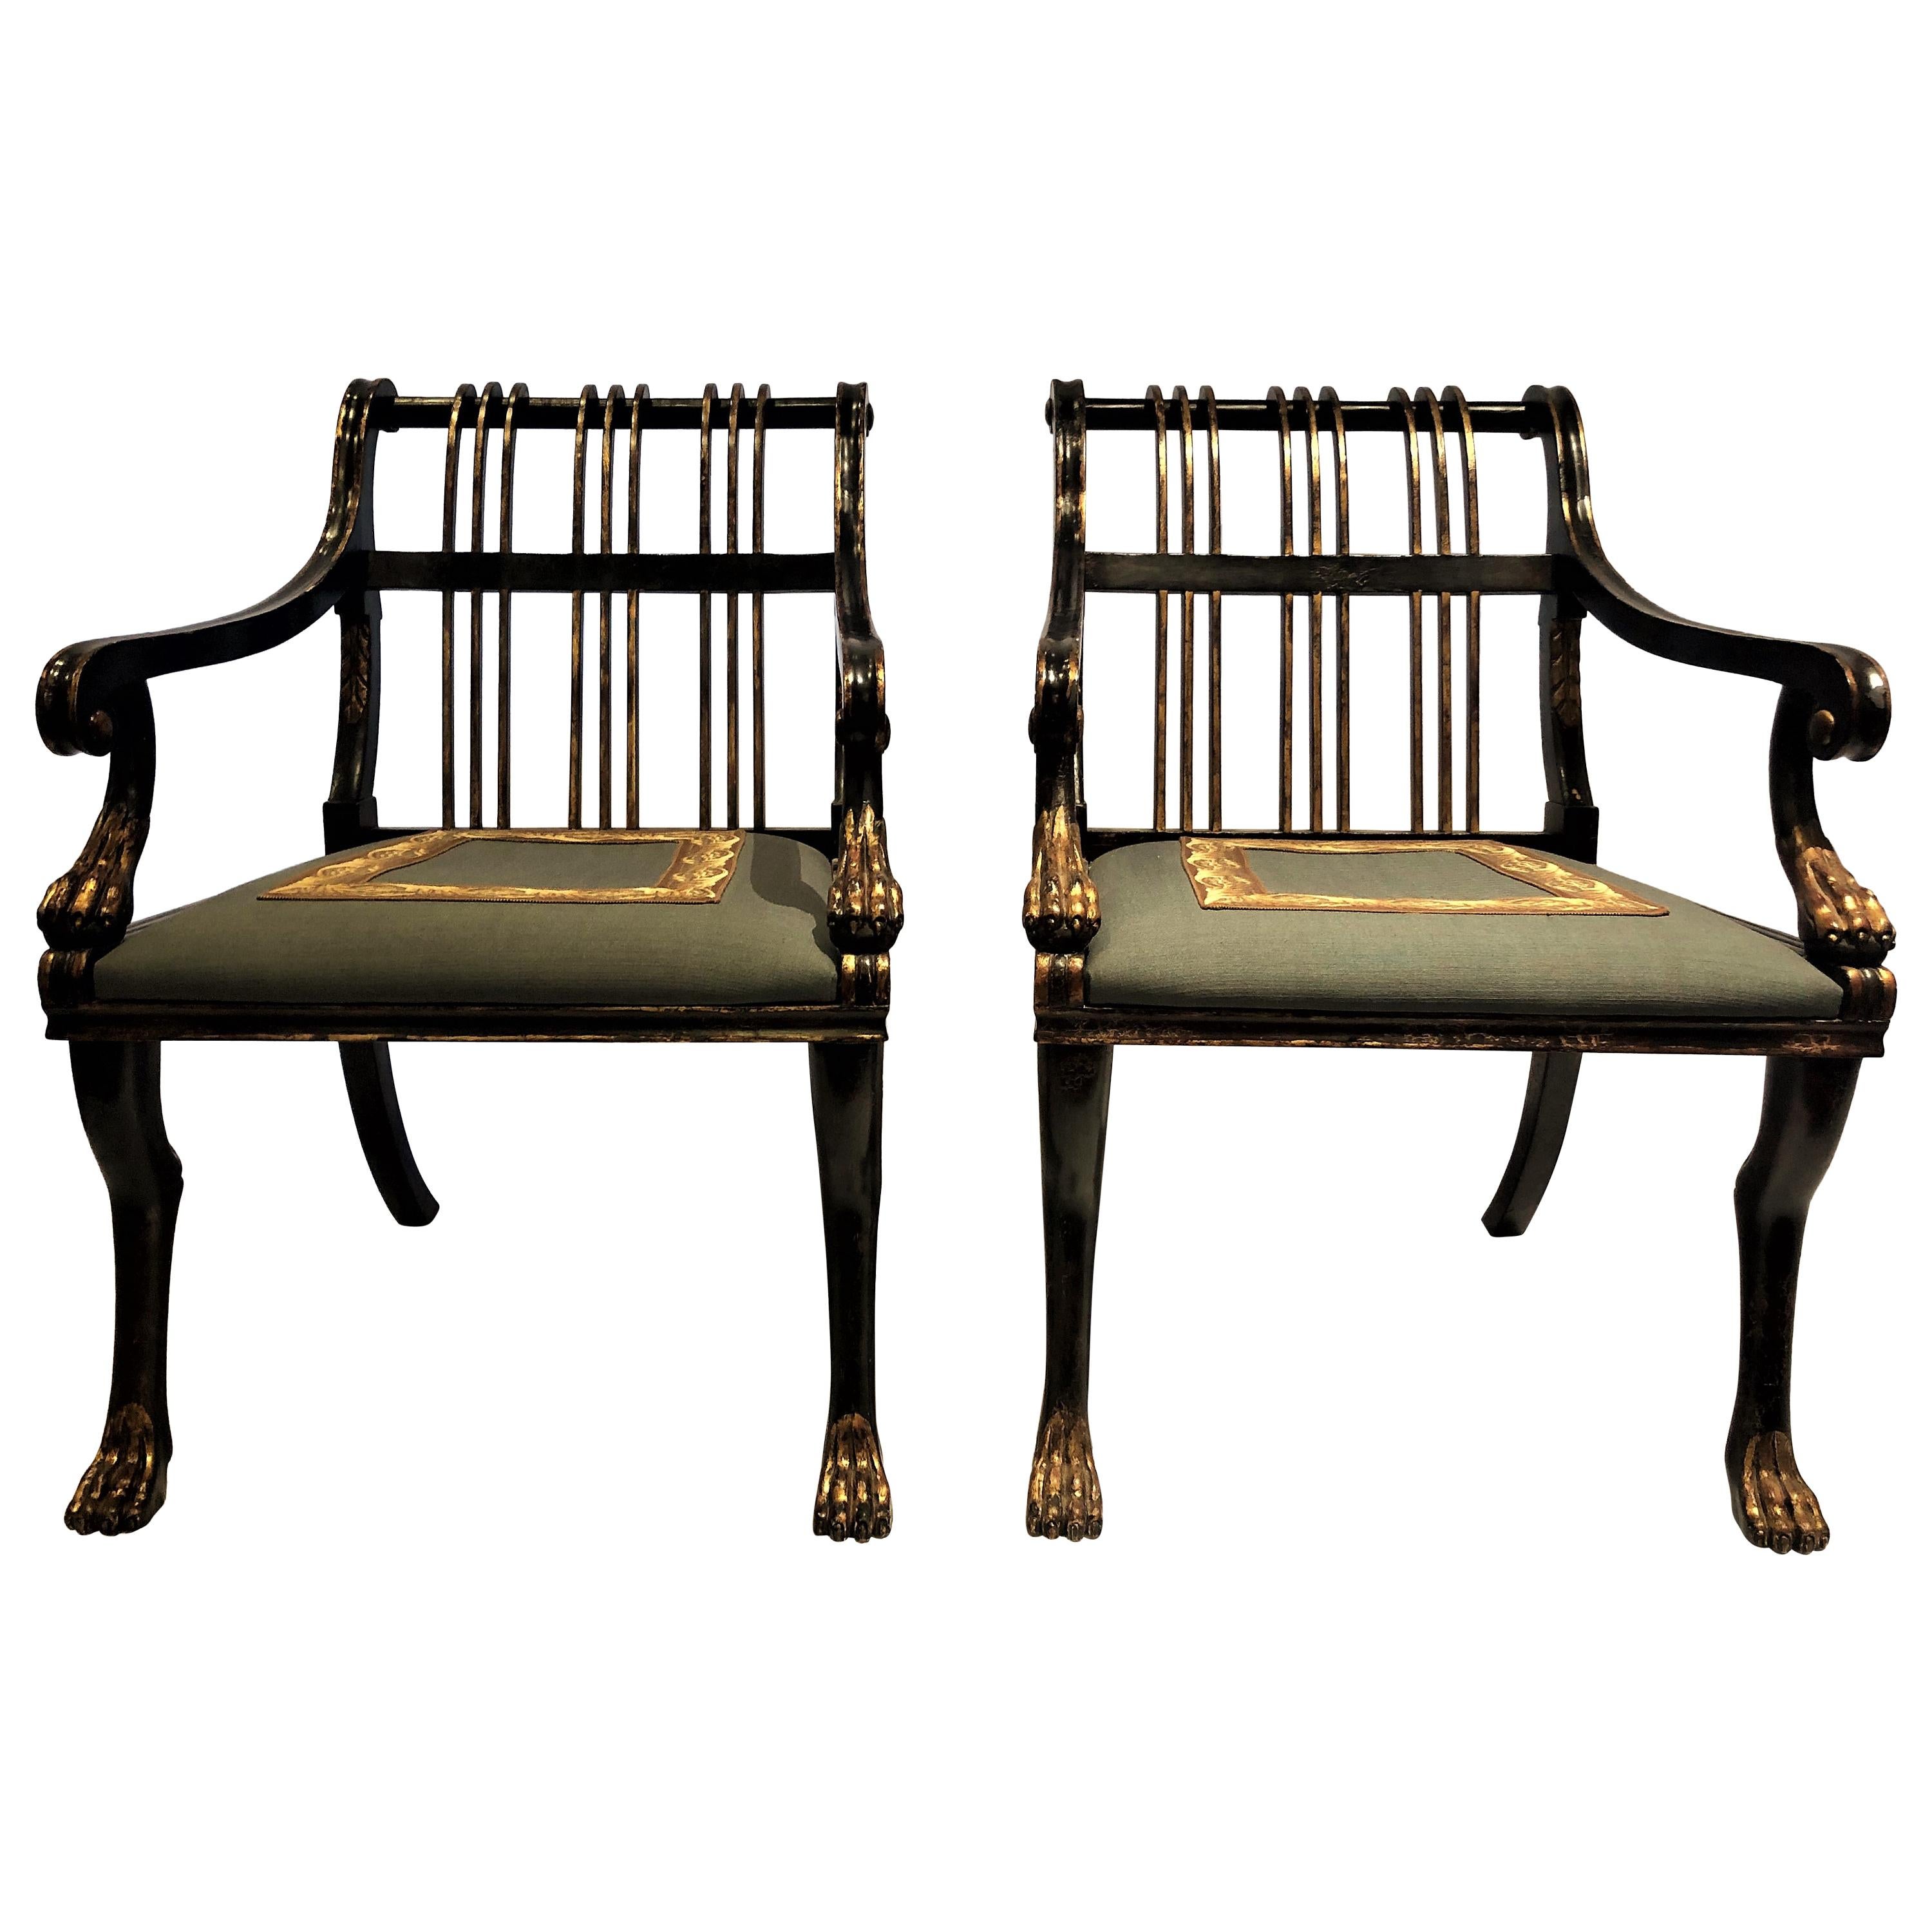 Pair of Antique French Early 20th Century Neoclassical Armchairs